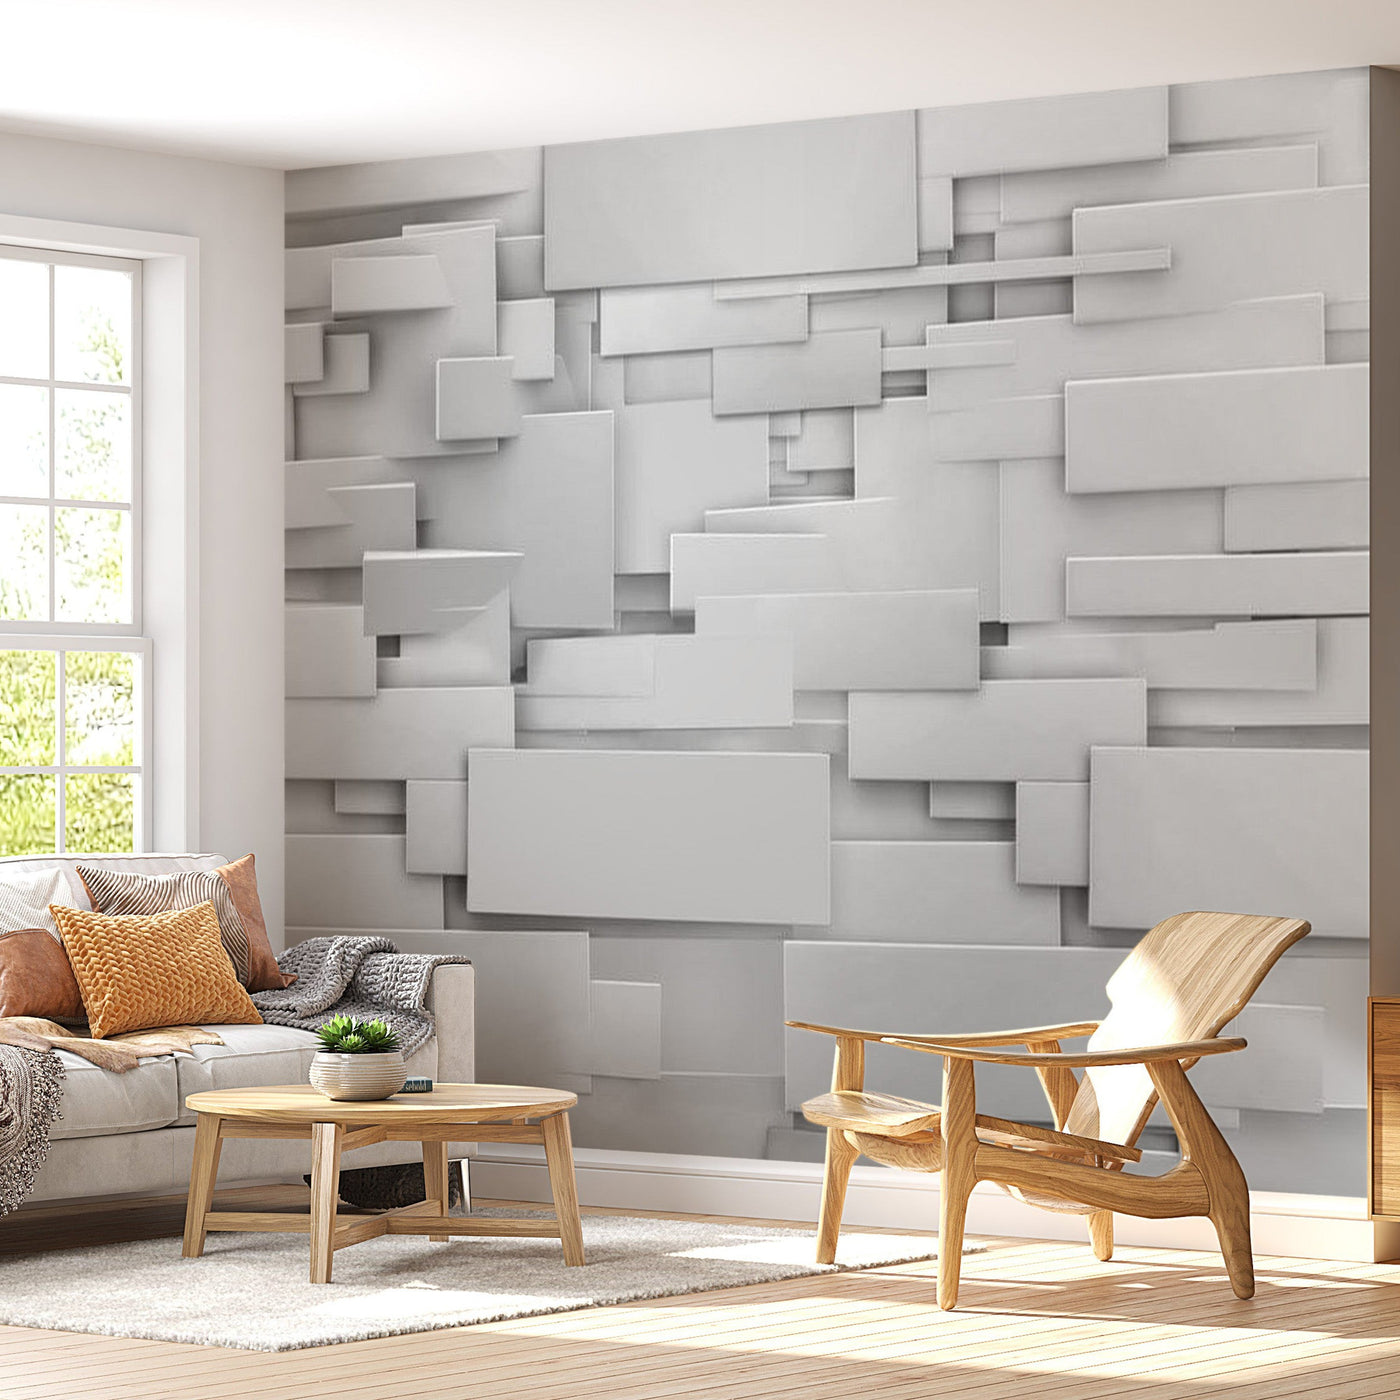 Peel & Stick Wall Mural - Abstract Grey Plates - Removable Wall Decals